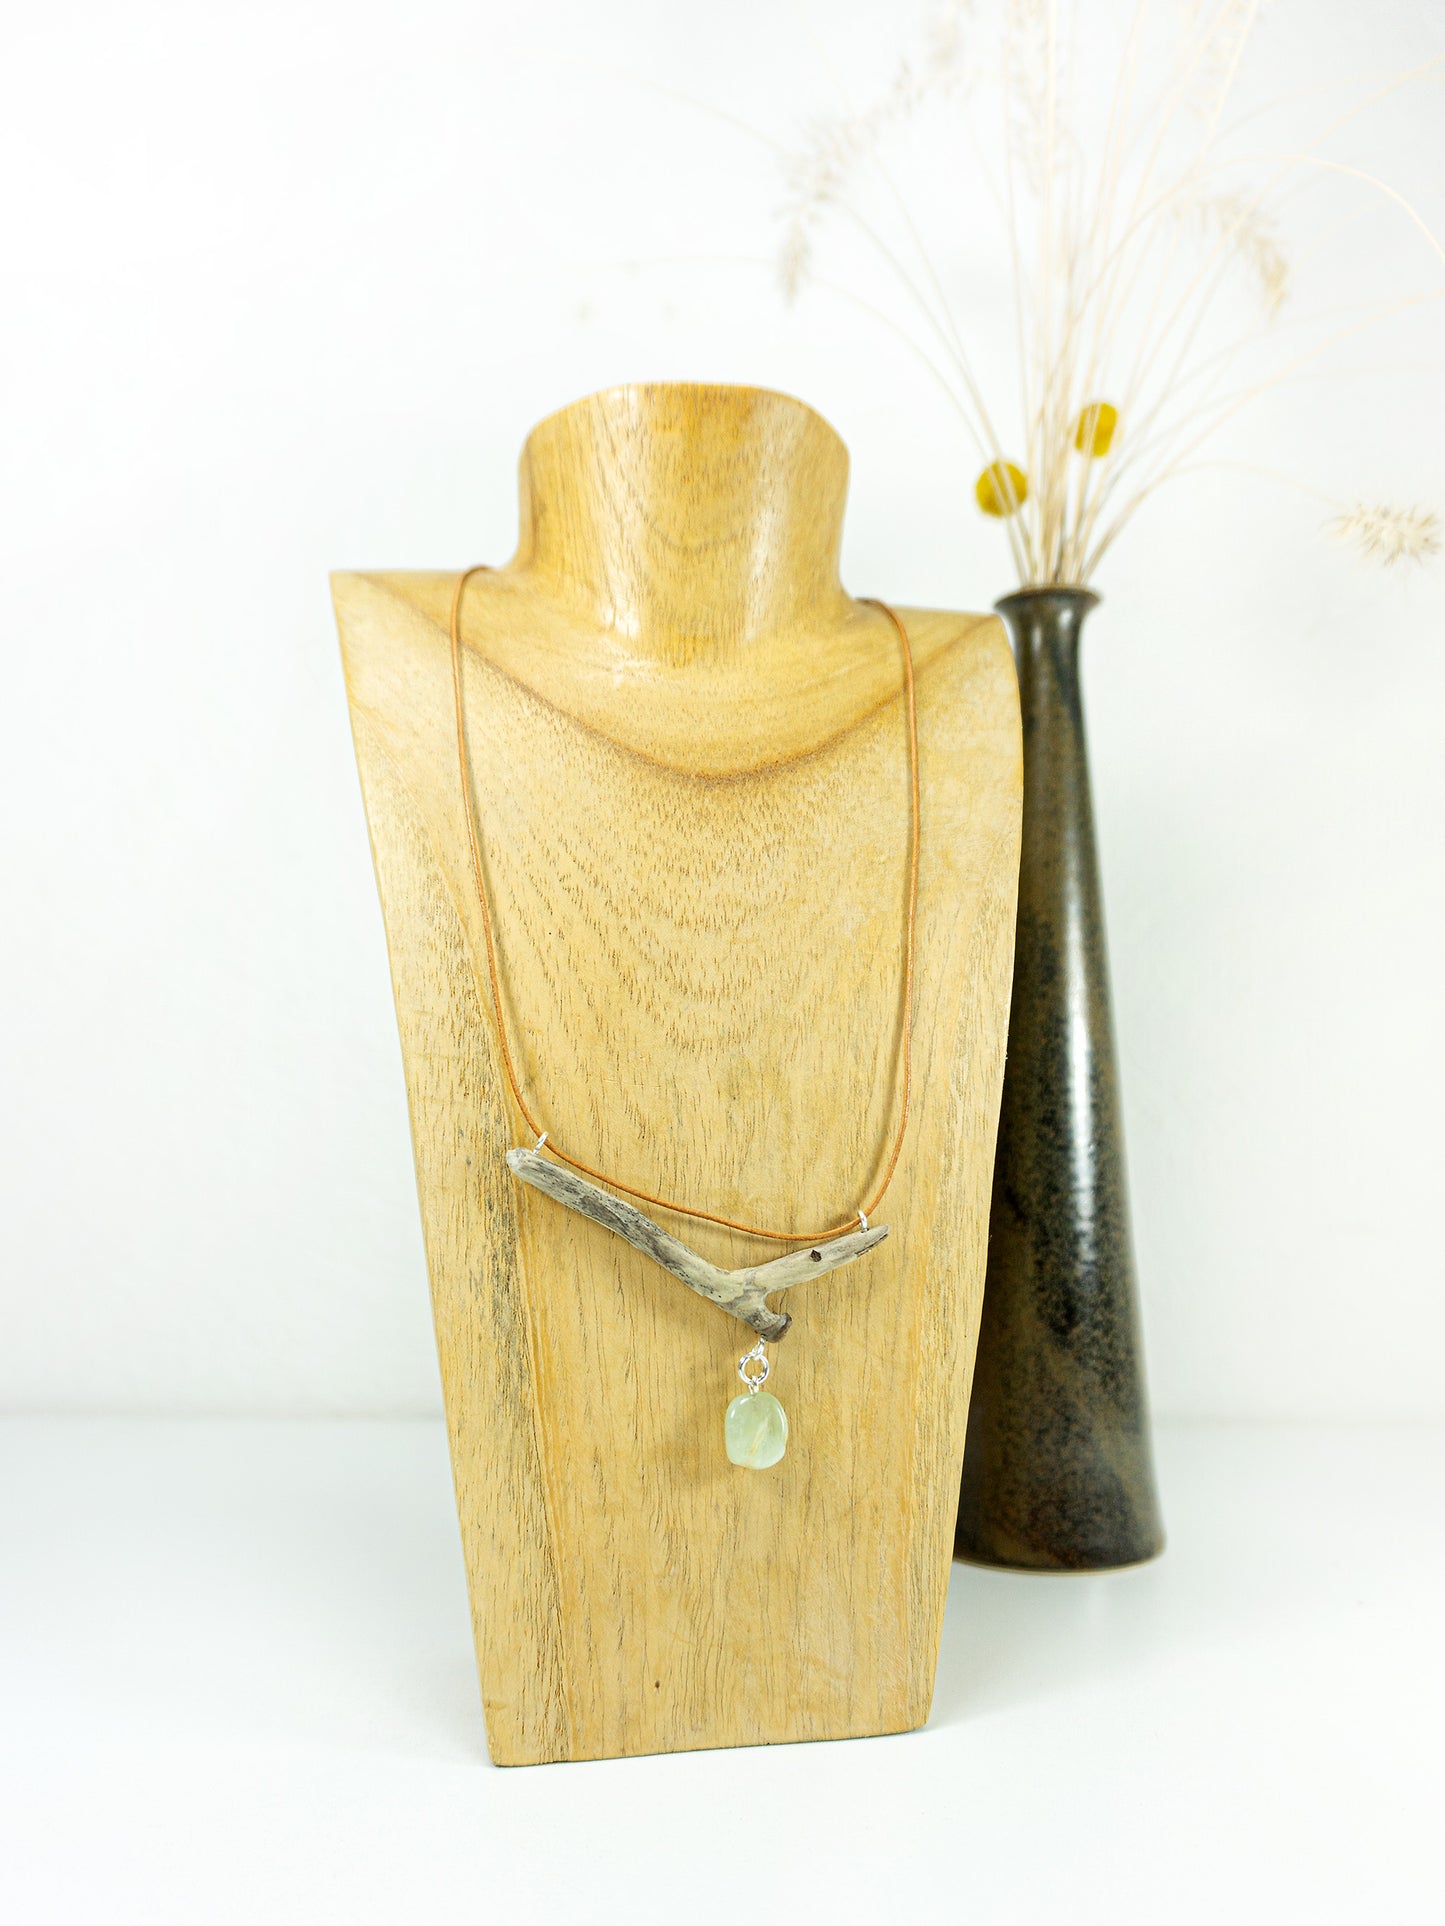 One-of-a-kind DRIFTWOOD LEATHER Necklace 'Sylt' with new jade gem, 925 silver